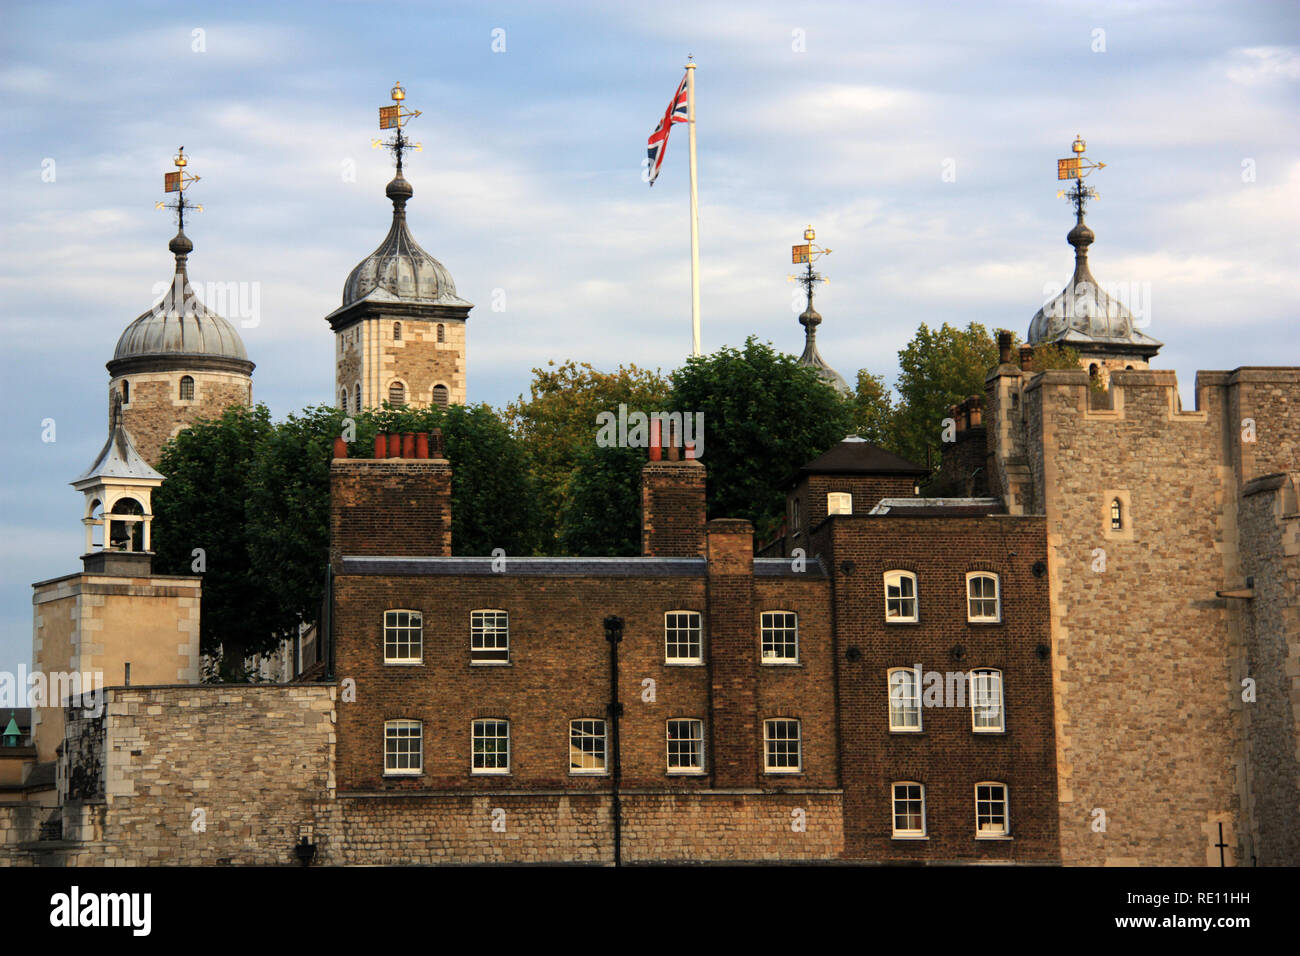 Union Jack waving on a flagpole at Her Majesty's Royal Palace and Fortress of the Tower of London, United Kingdom Stock Photo